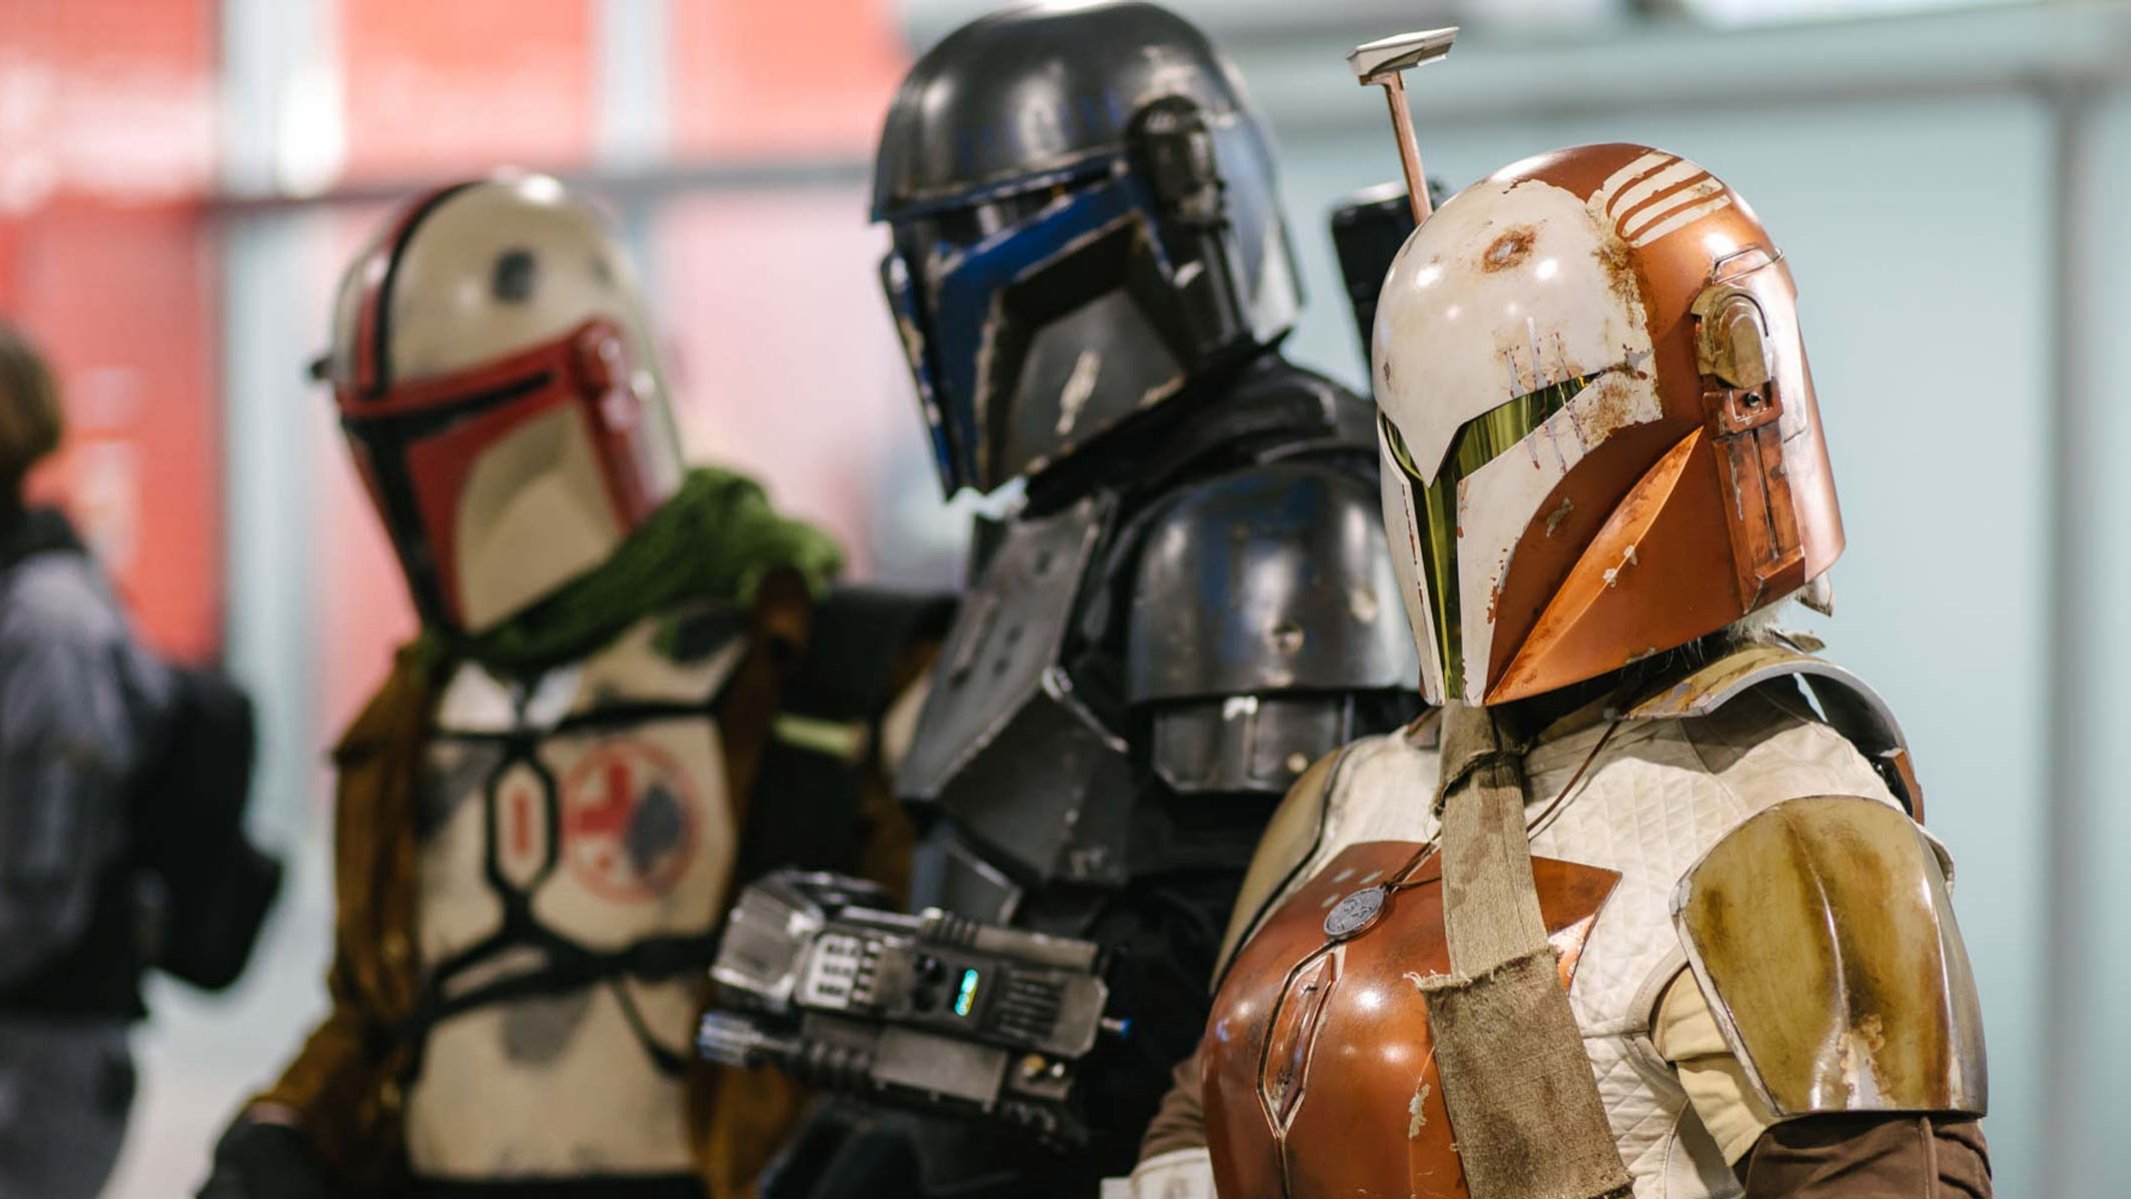 Have a fan club you want to host on the show floor?  A collector’s ensemble?  A community-group sign up?  Apply here to have your fan table at Star Wars Celebration. Applications open Wednesday, May 15, 2024.